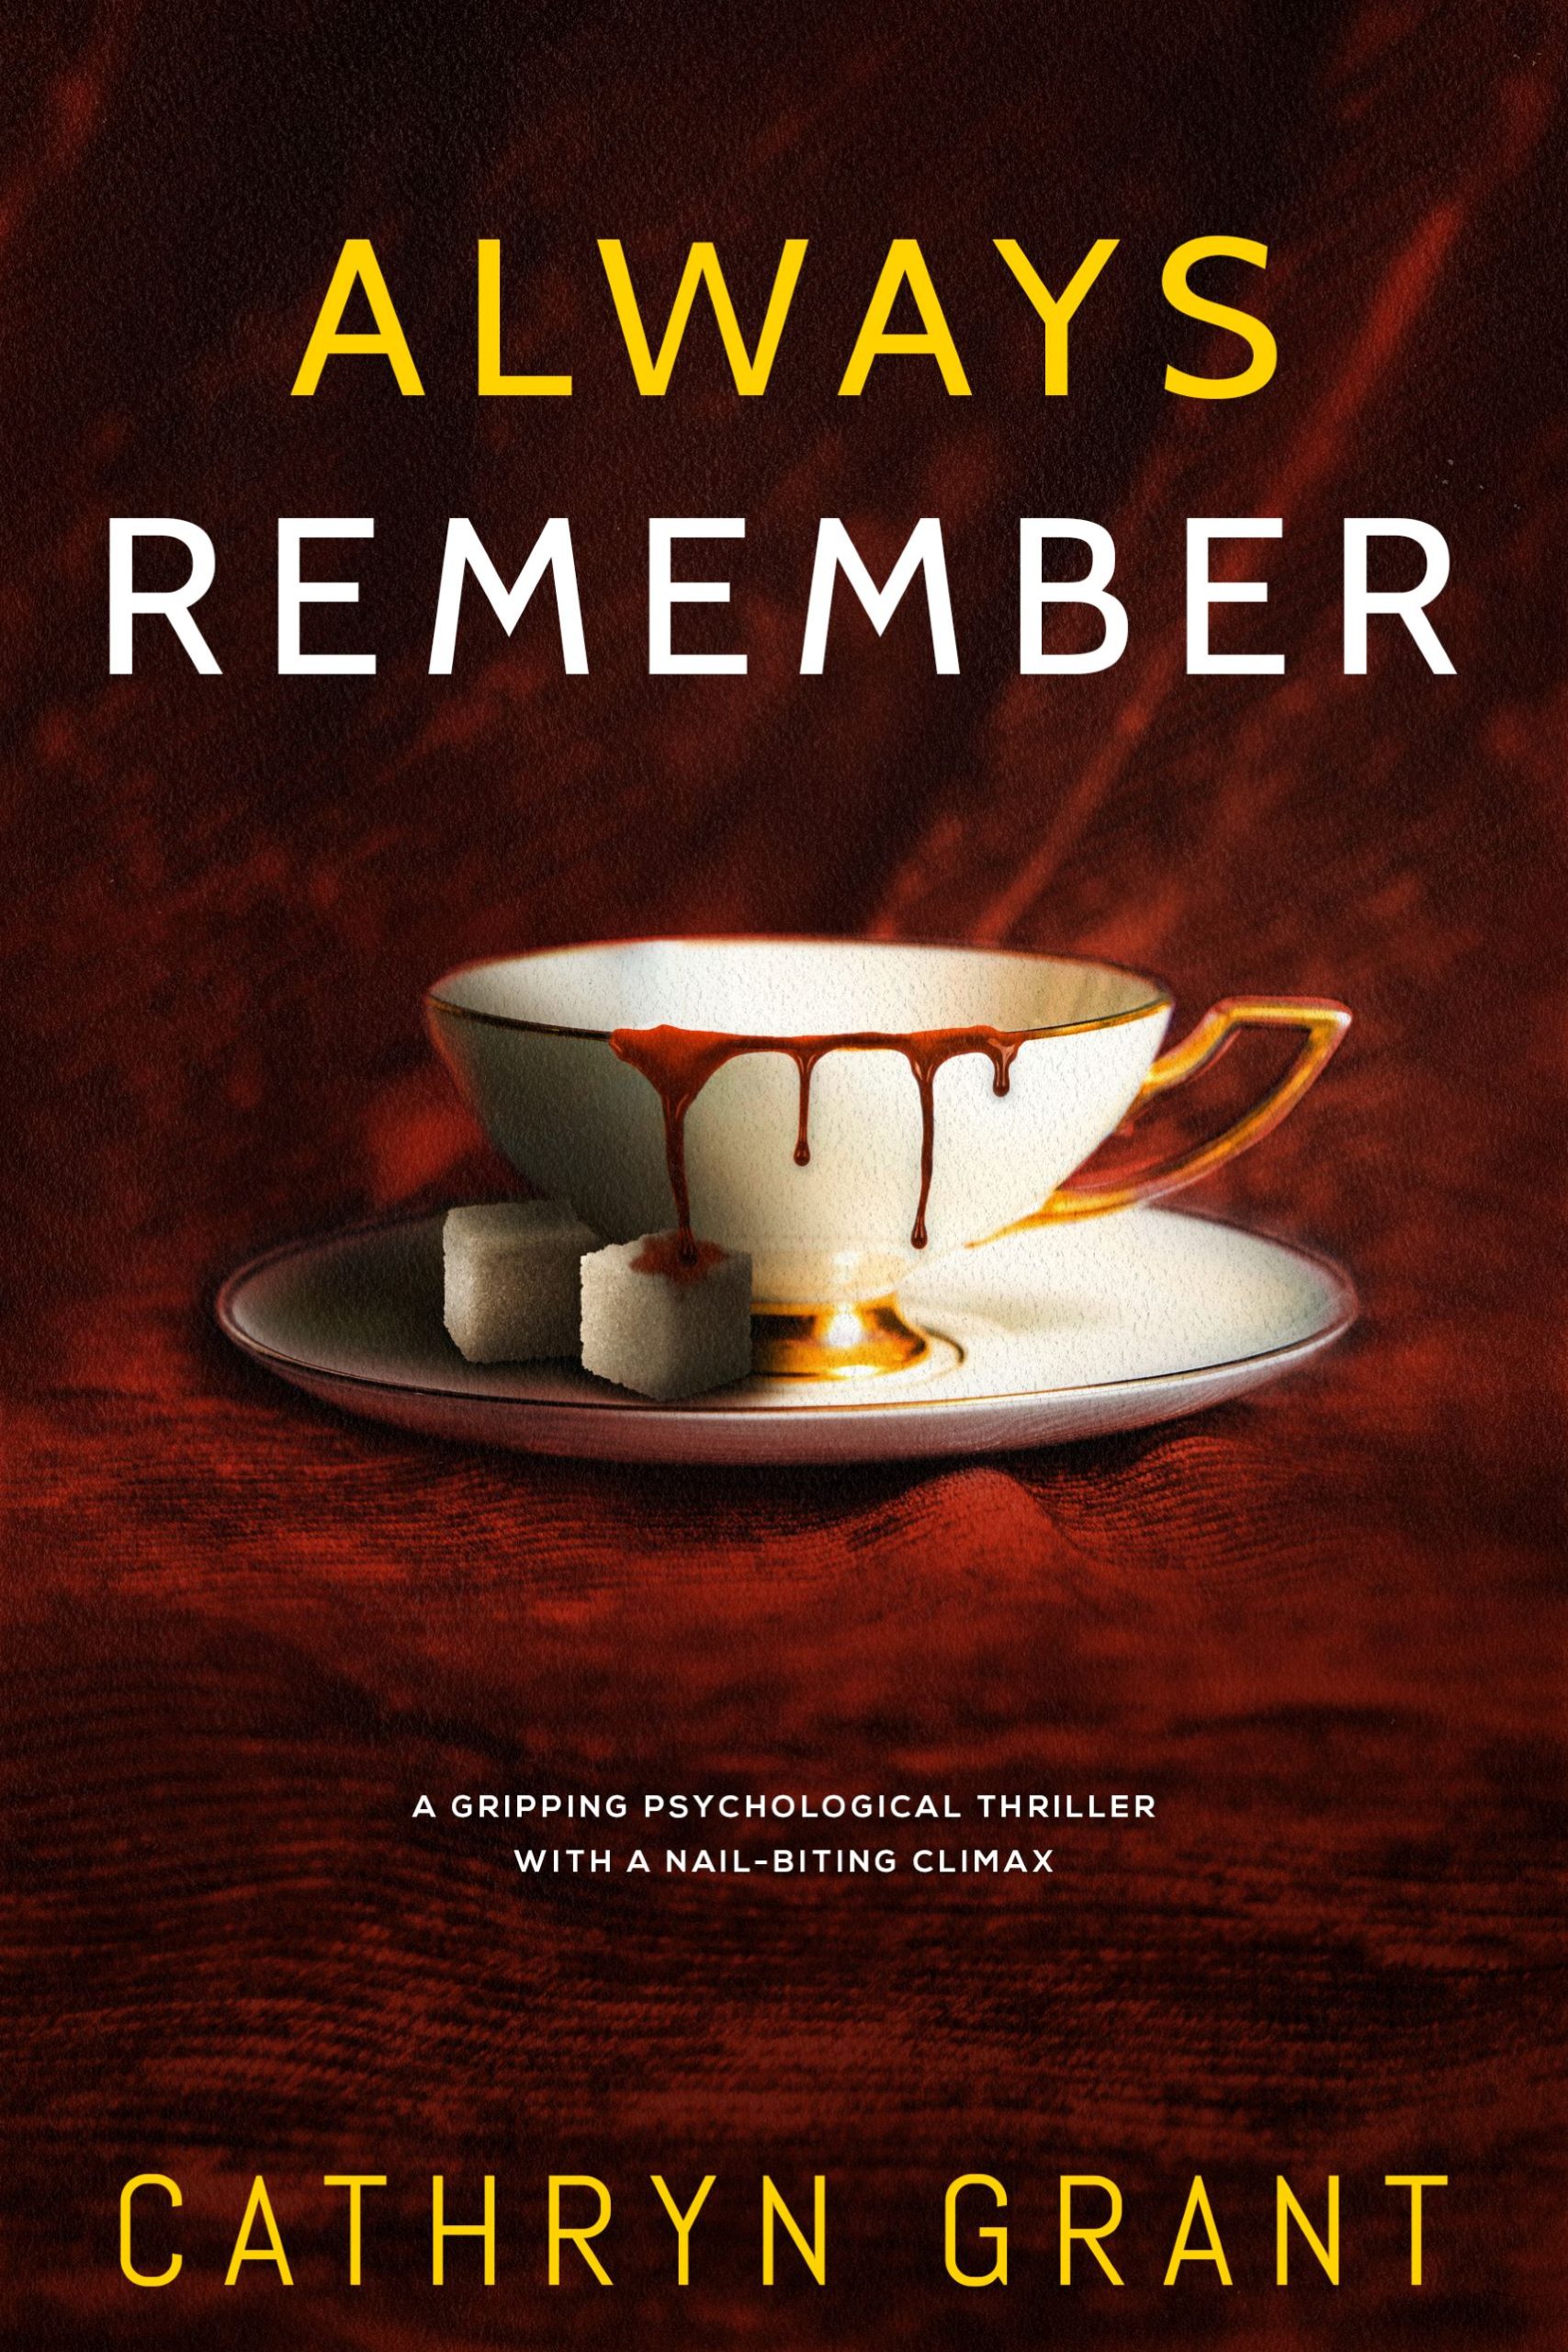 CATHRYN GRANT NEW RELEASE – ALWAYS REMEMBER